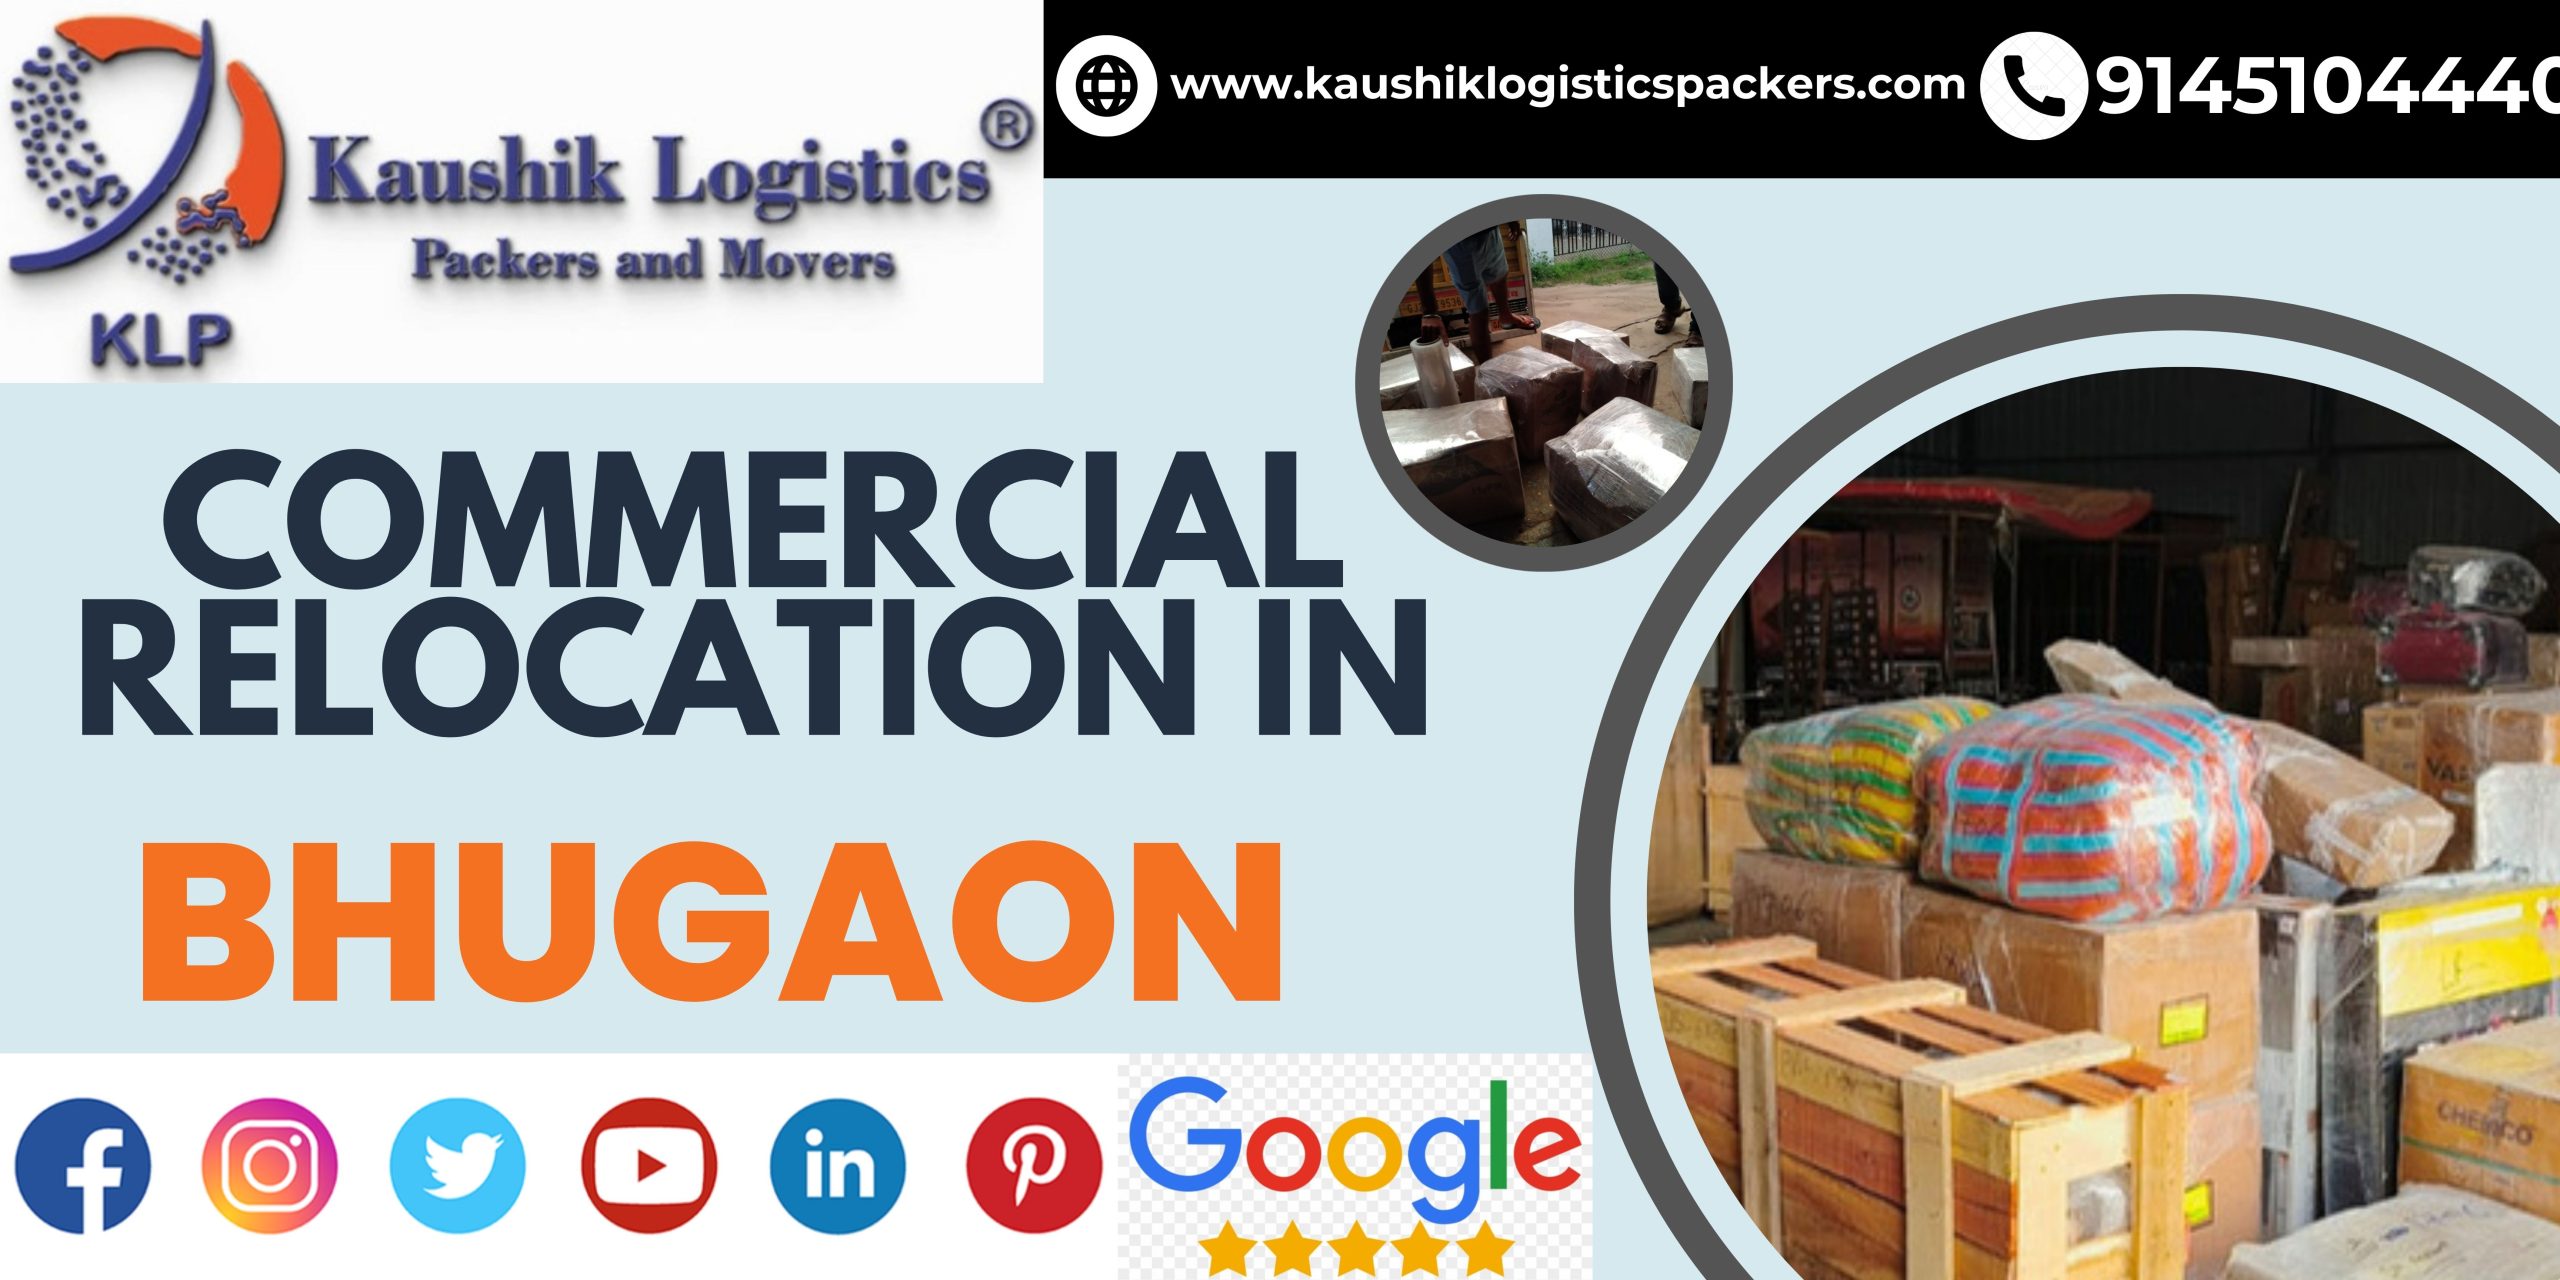 Packers and Movers In Bhugaon